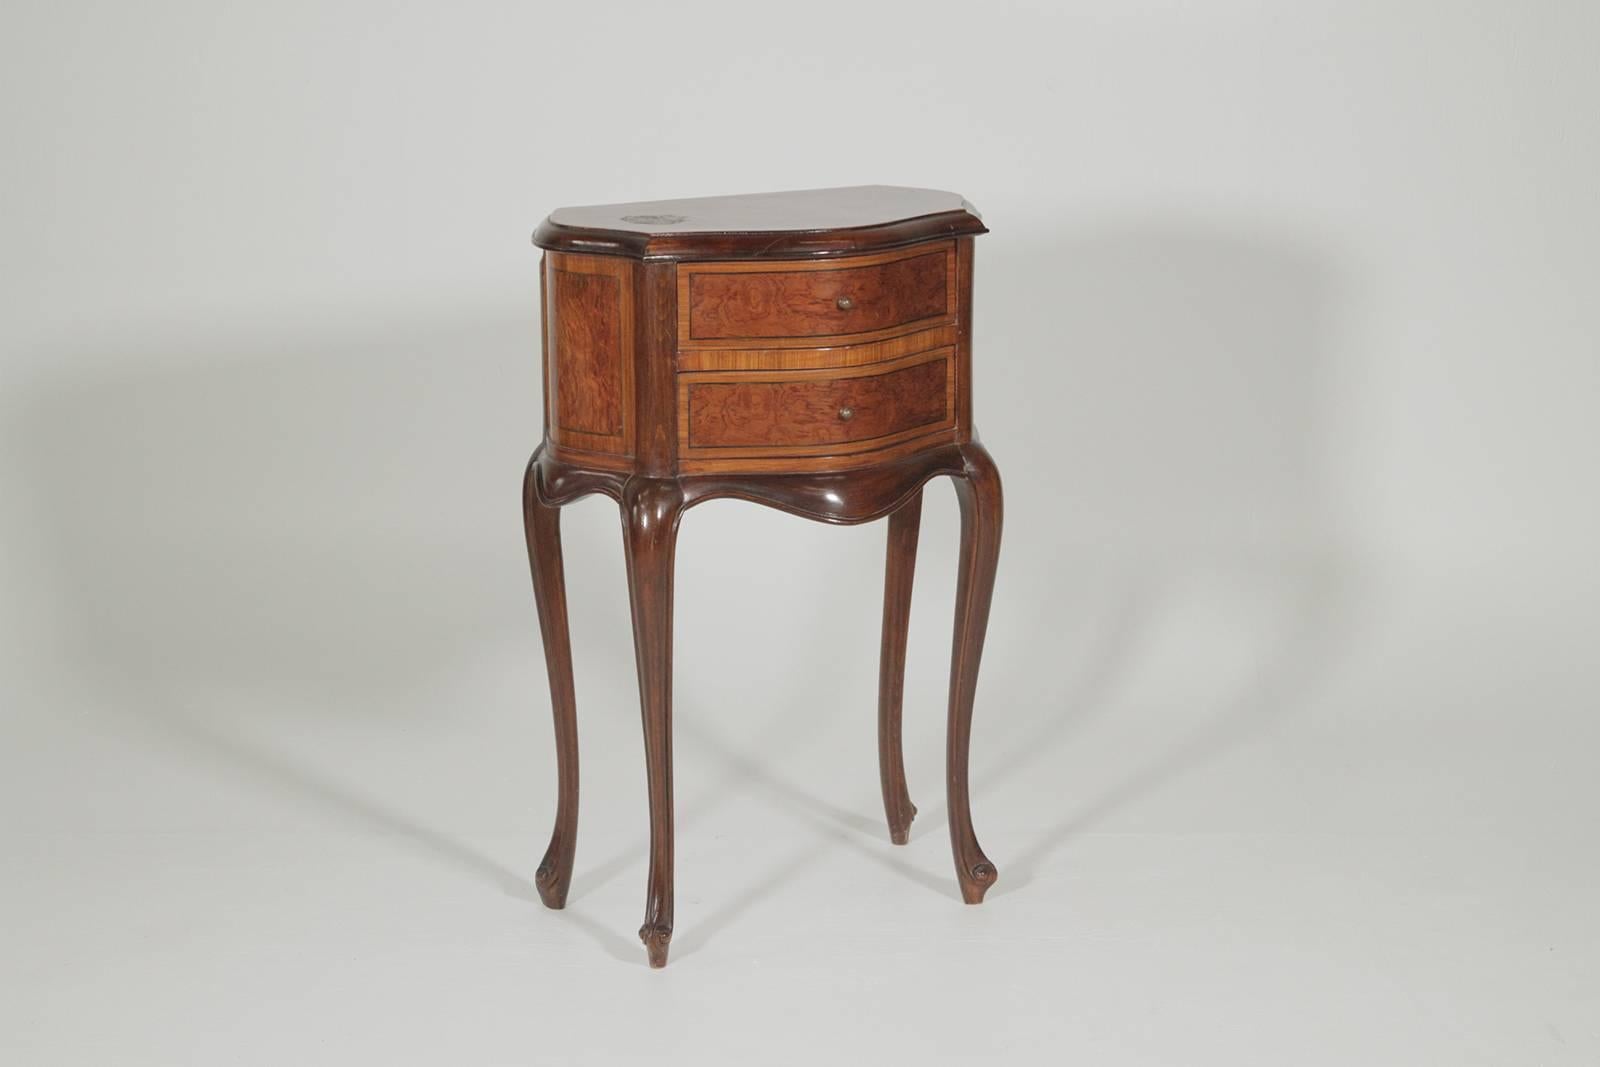 Pair of nearly matched two-drawer side tables each one with two working drawers in a burl mahogany, ebony and satinwood. The pairs is the same size and exact shape but with a slightly different inlay on the drawers.